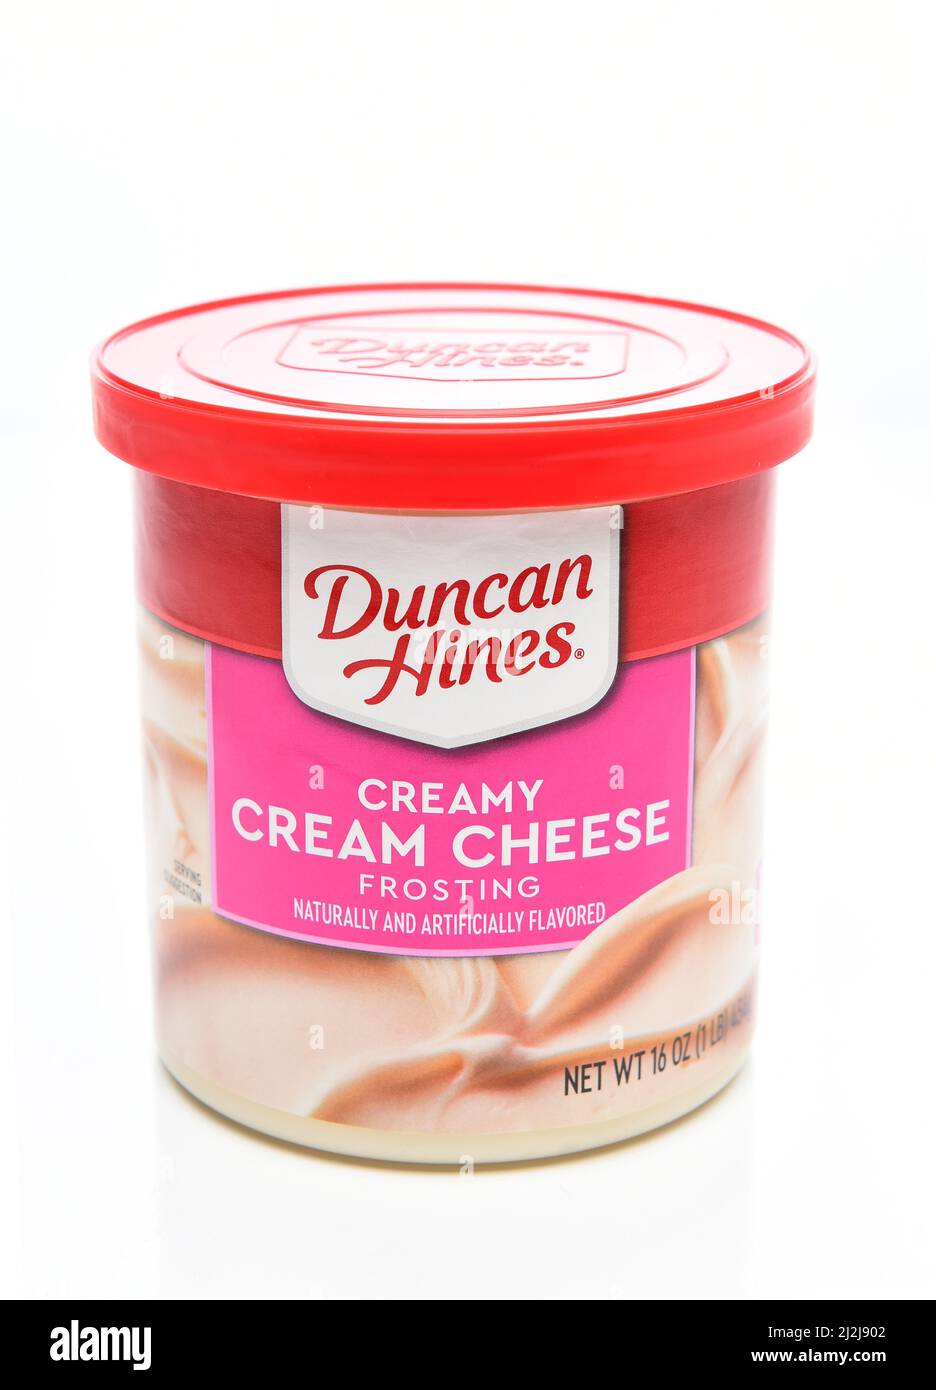 IRVINE, CALIFORNIA - 1 APR 2022: A can of Duncan Hines Cream Cheese Frosting. Stock Photo